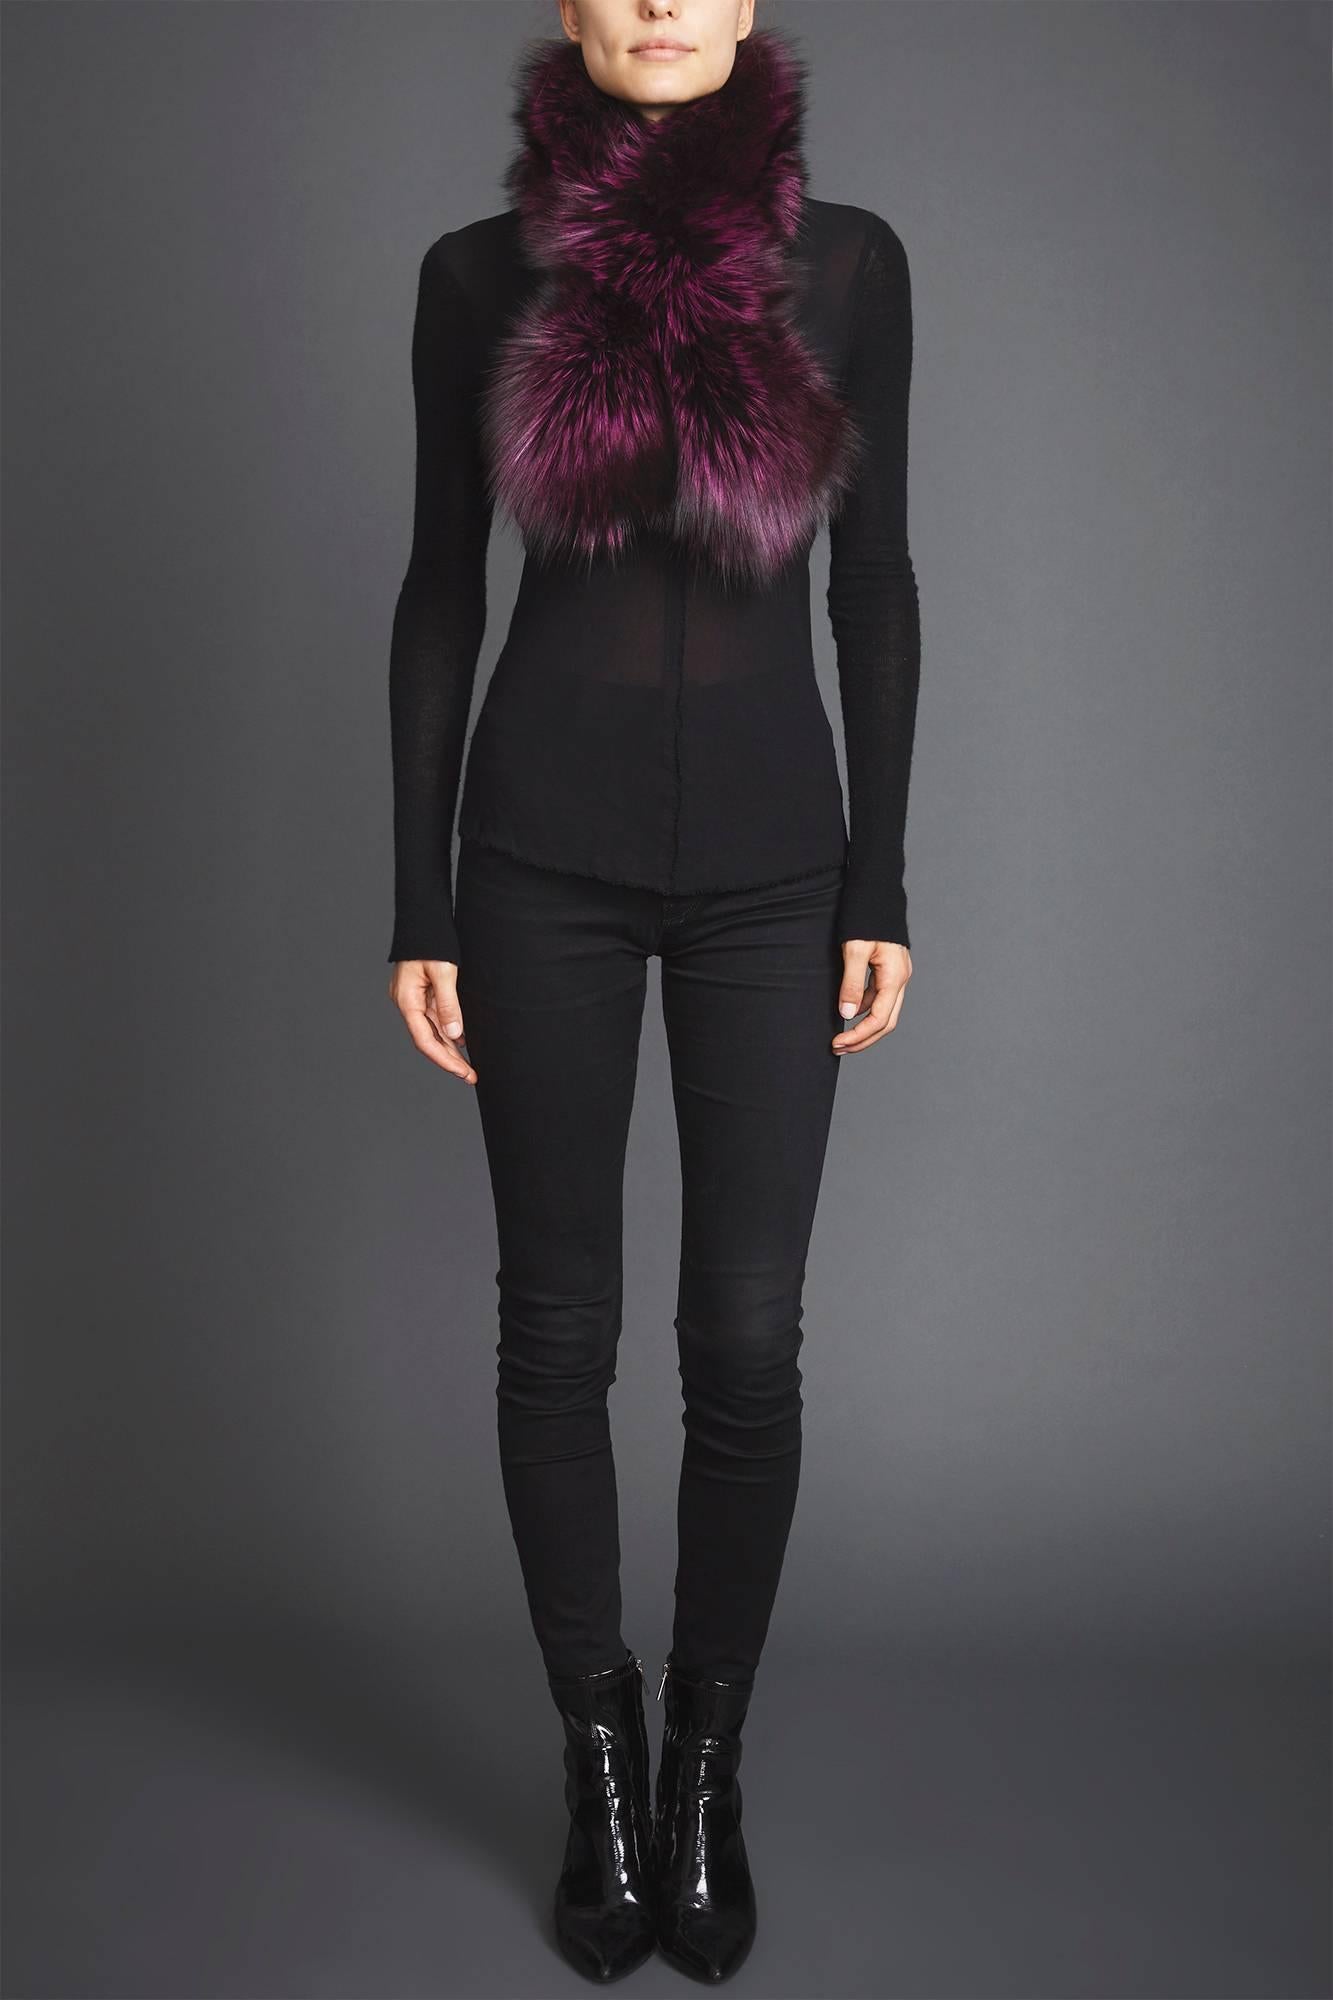 Verheyen London Lapel Cross-through Collar Stole in Purple Fox Fur - Brand New 

The Lapel Cross-through Collar is Verheyen London’s casual everyday design, which is perfectly shaped to wear over any outfit.  Designed for layering, this structured